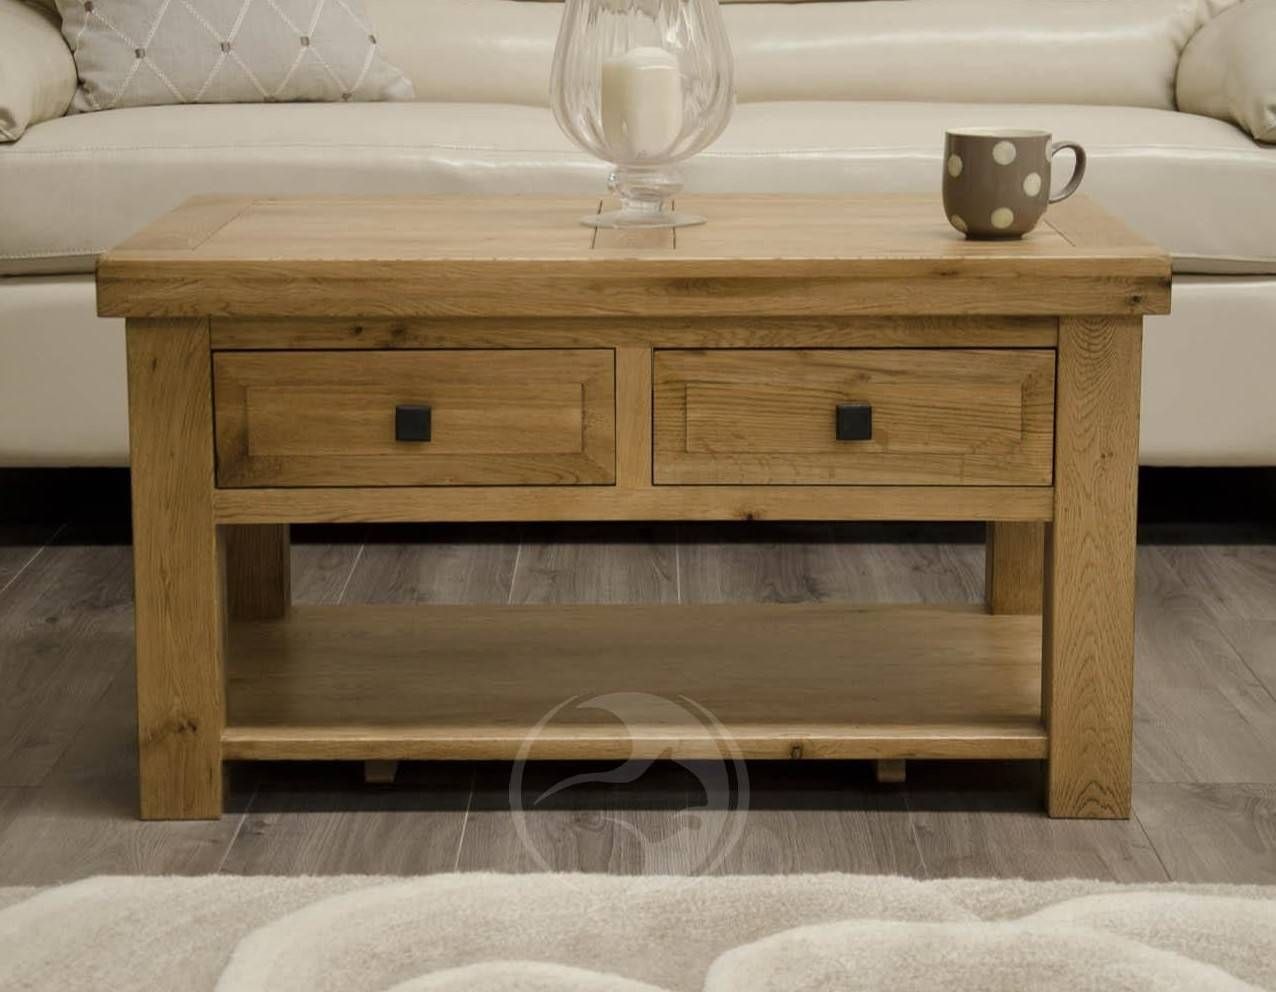 Coniston Rustic Solid Oak Coffee Table With Drawers | Oak Furniture Uk Intended For Rustic Oak Coffee Tables (View 15 of 15)